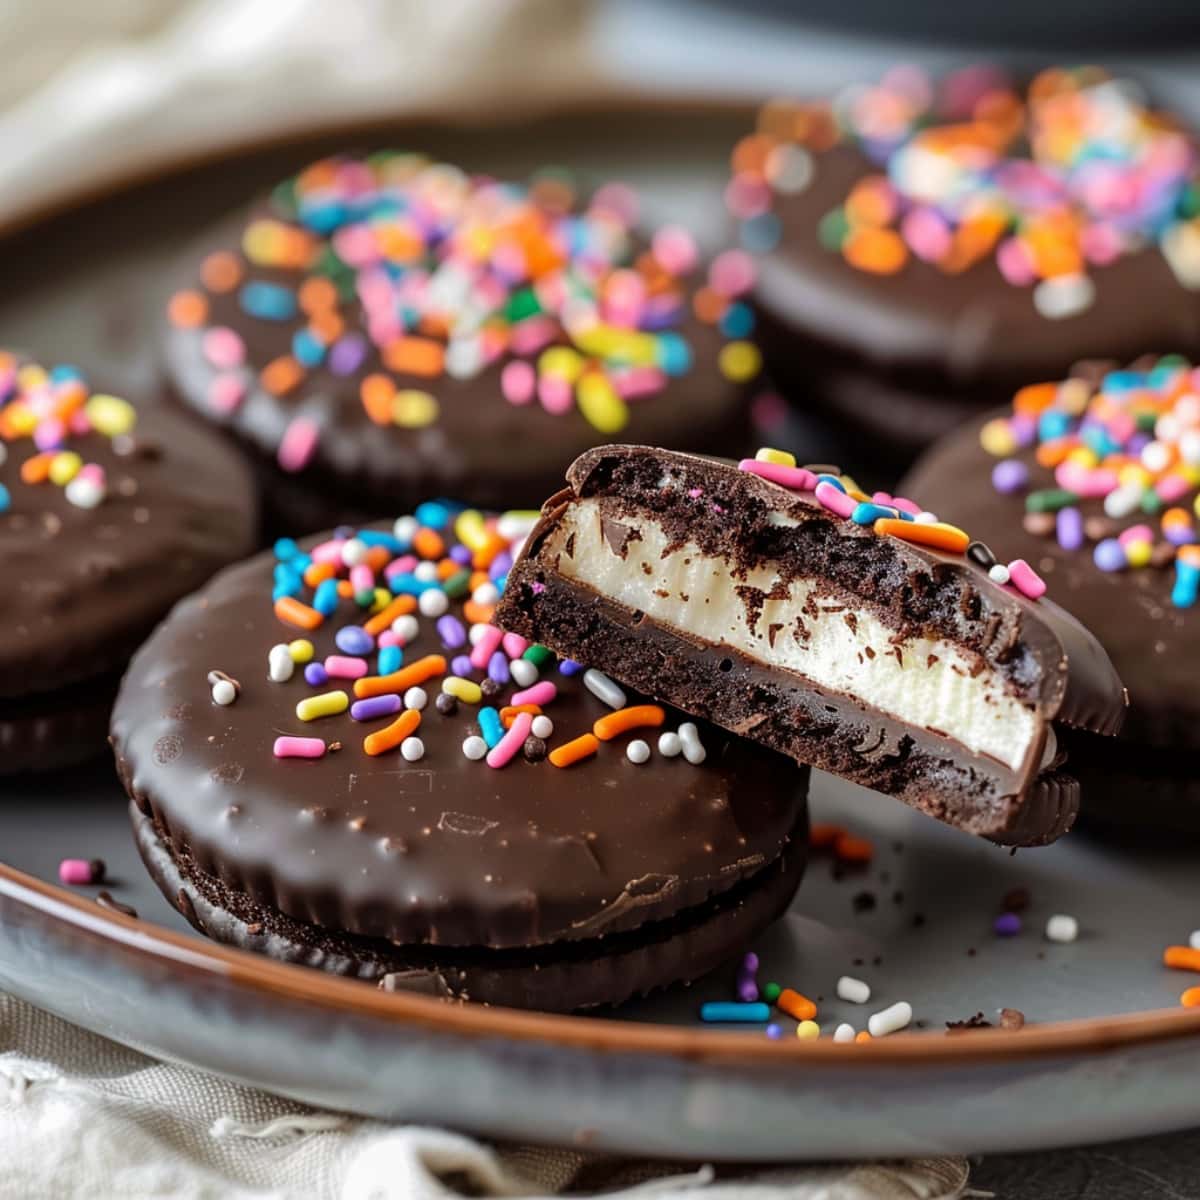 Chocolate Covered-Oreos with sprinkles